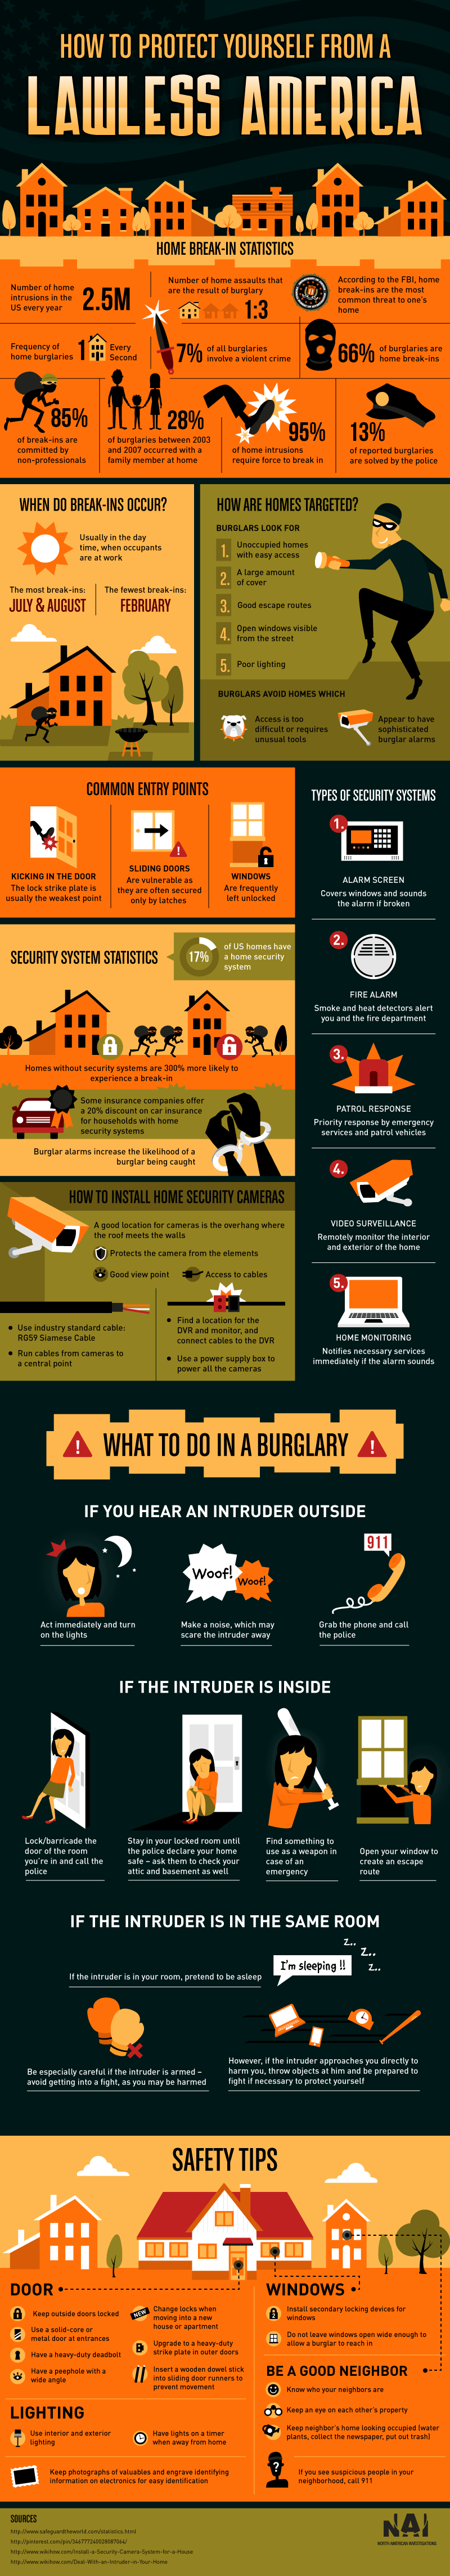 protect-yourself-from-a-lawless-america-infographic2